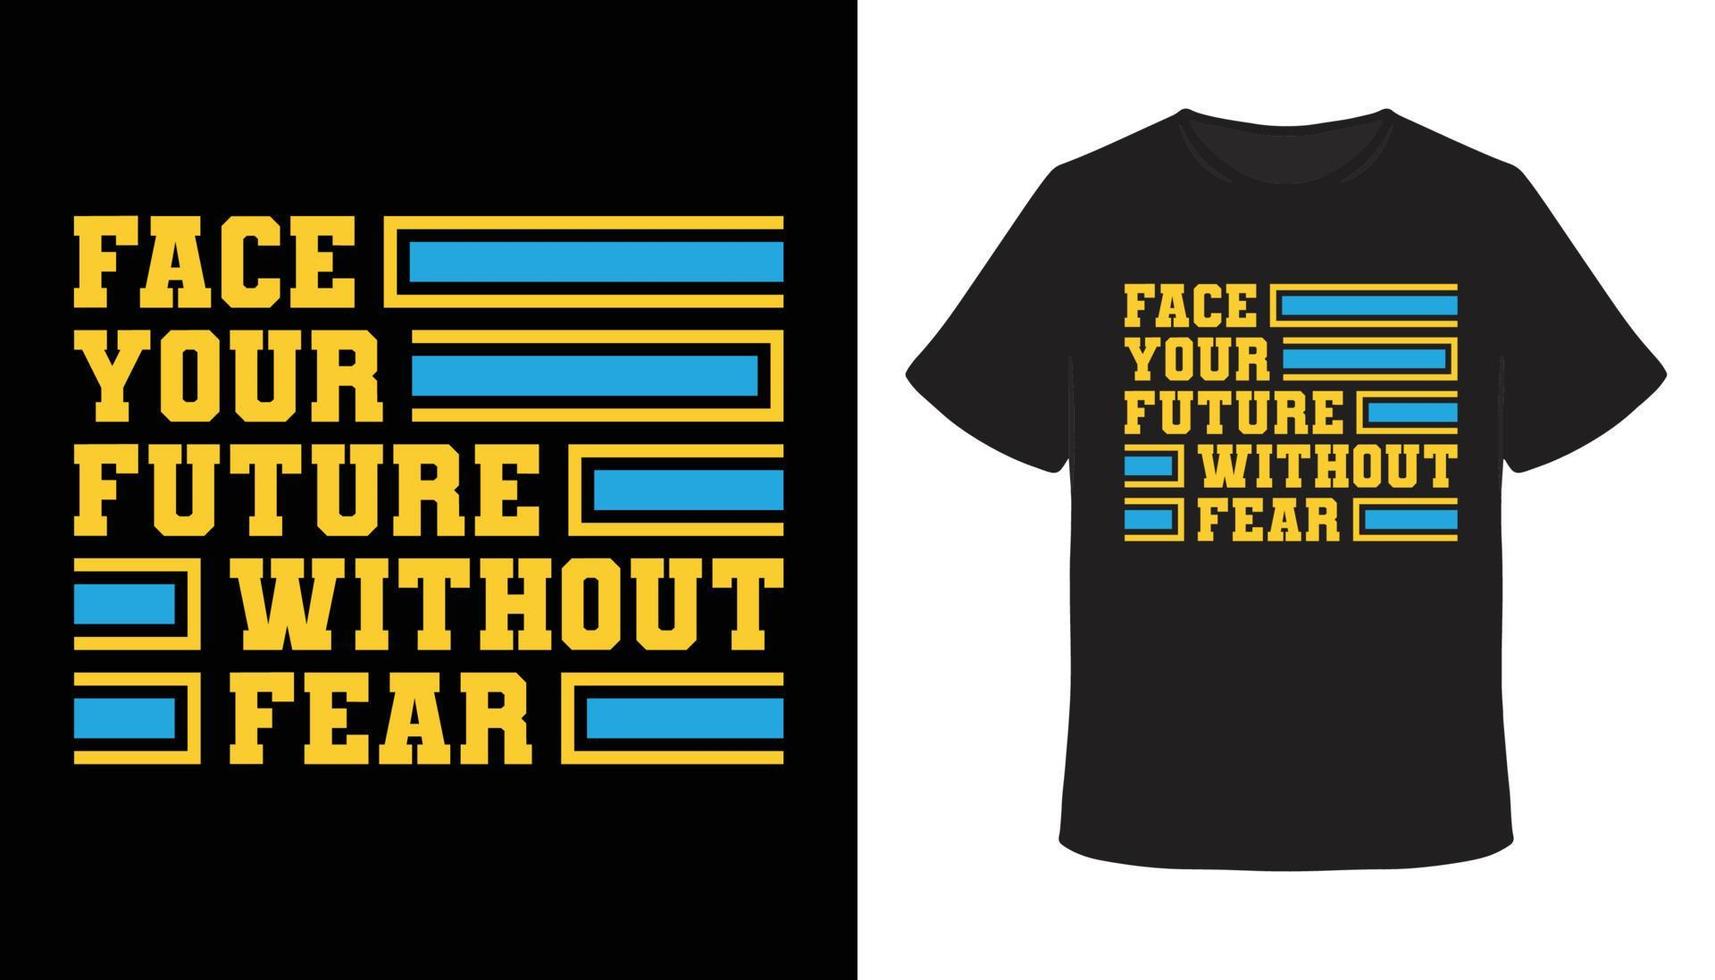 Face your future without fear typography t-shirt design vector